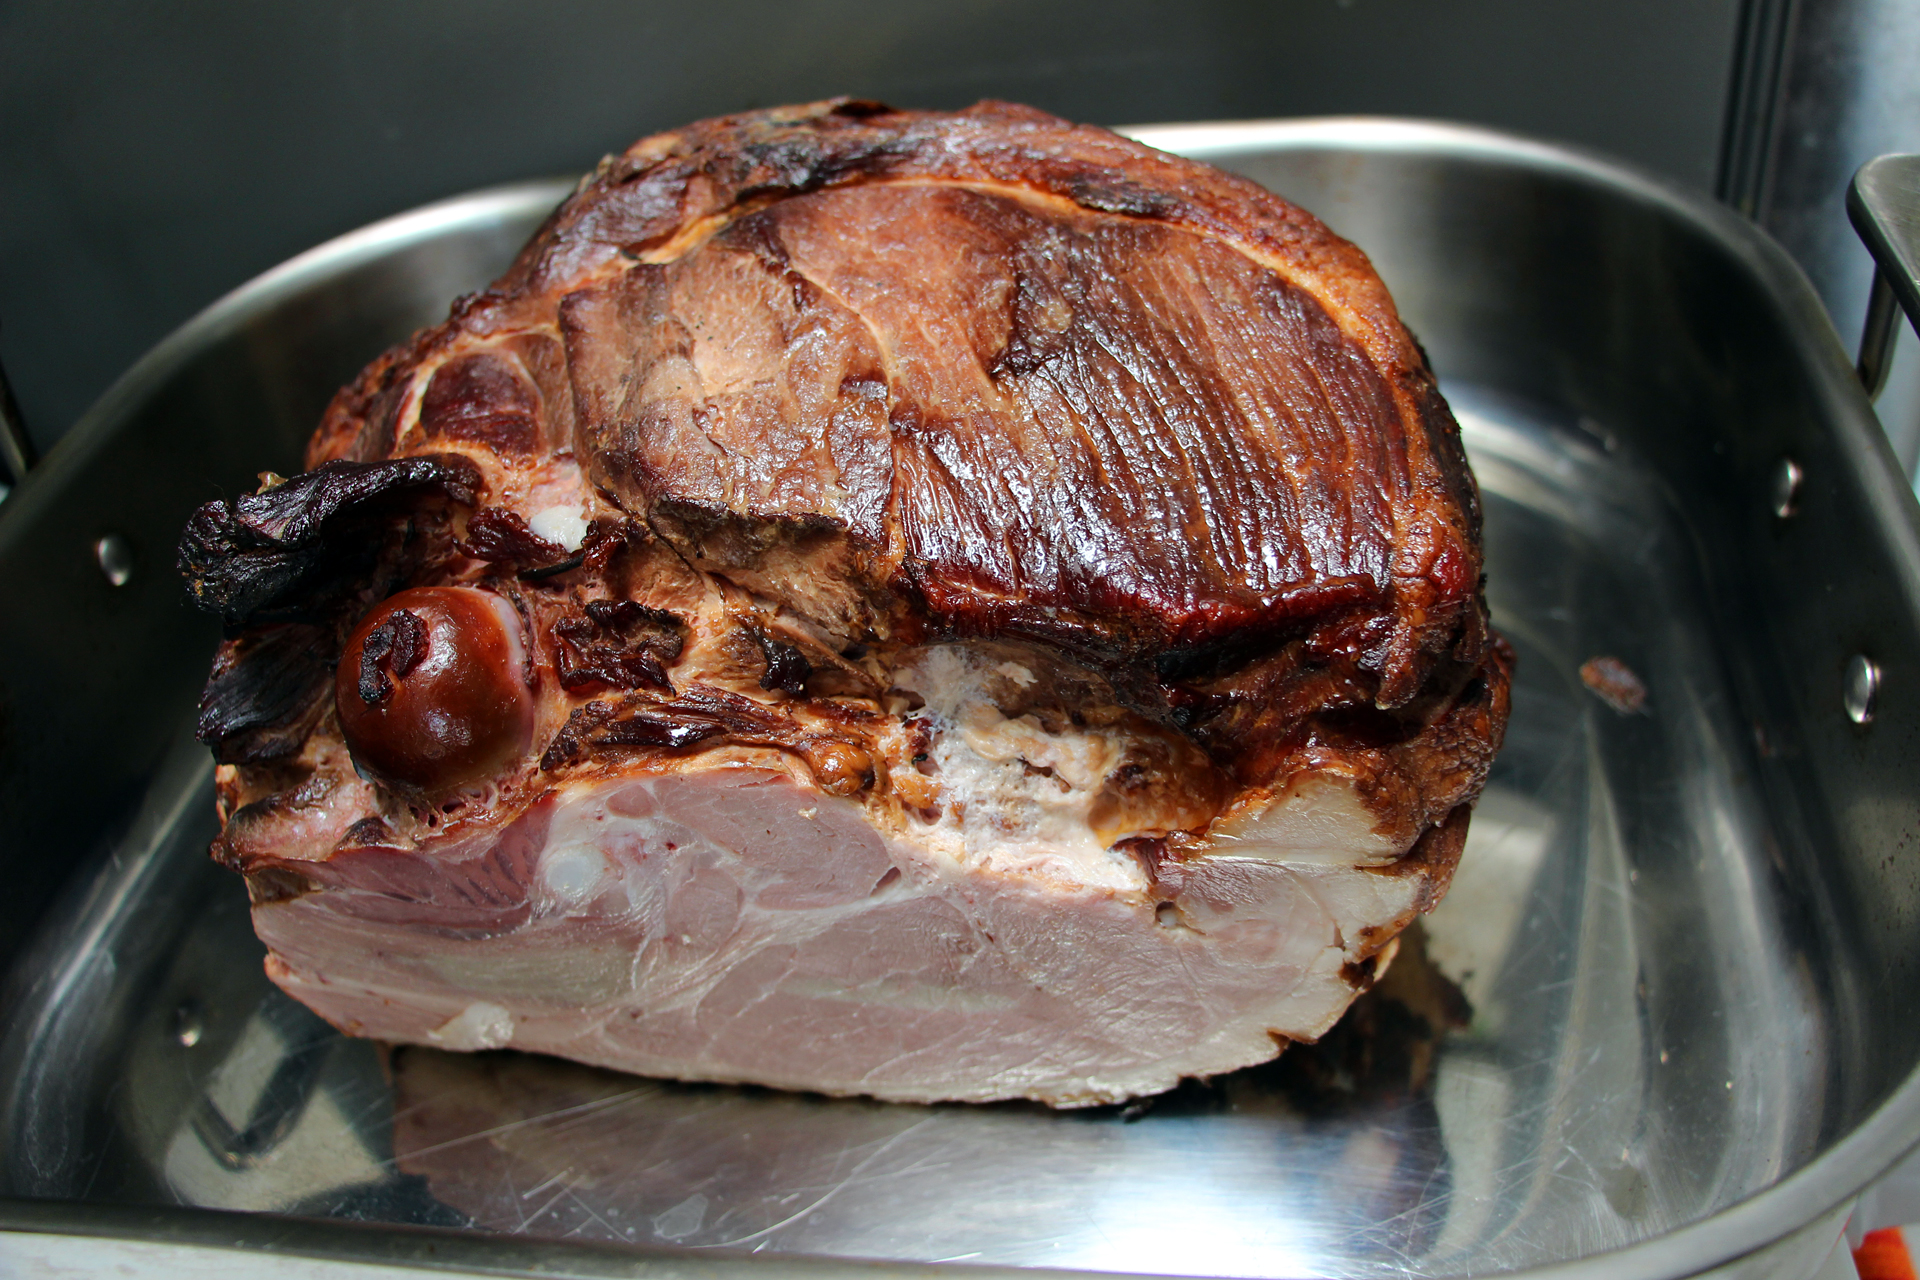 About 2 hours before you want to bake the ham, take it out of the fridge to come to room temperature